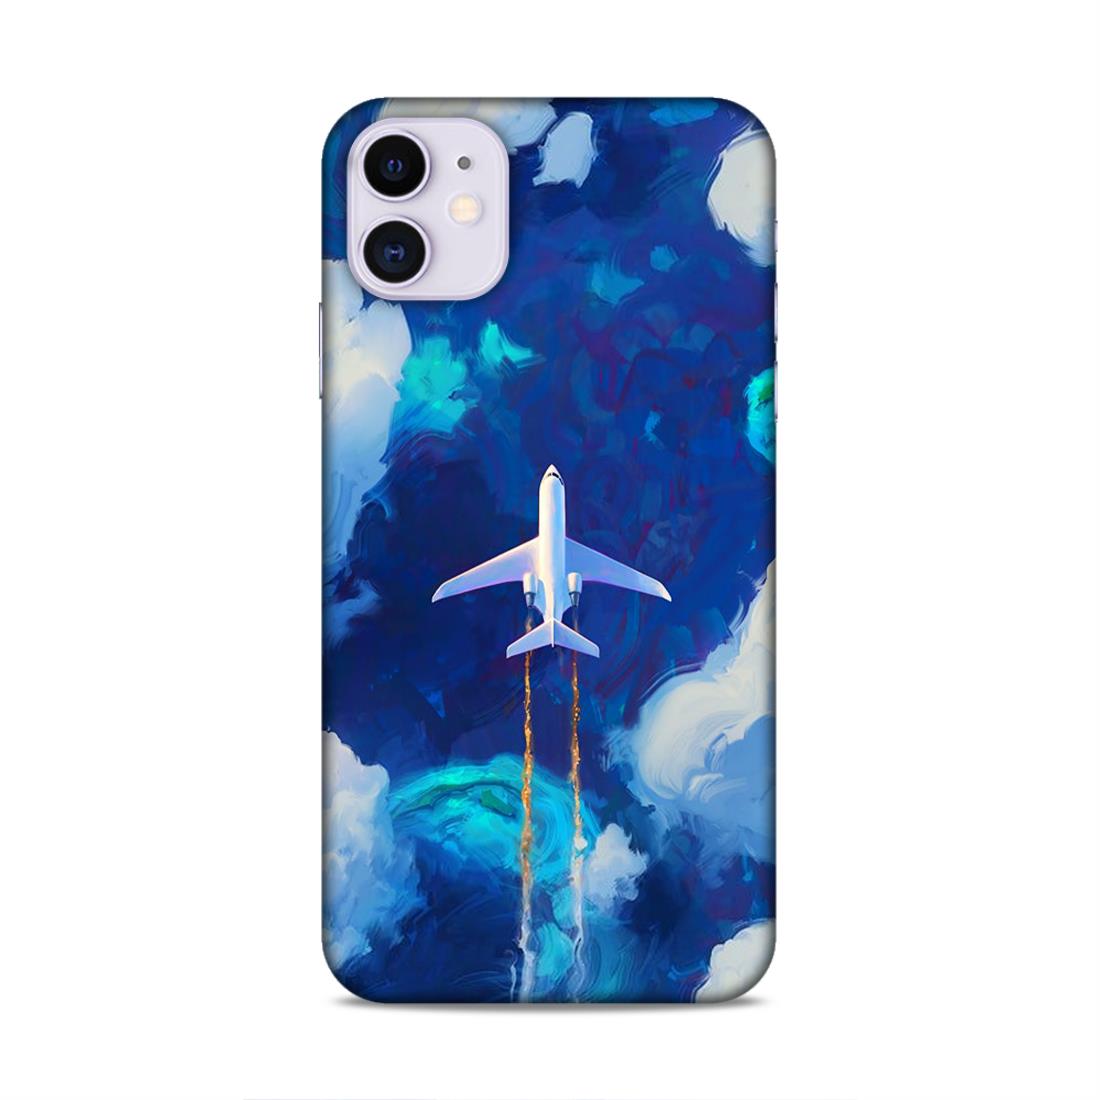 Aeroplane In The Sky Hard Back Case For Apple iPhone 11